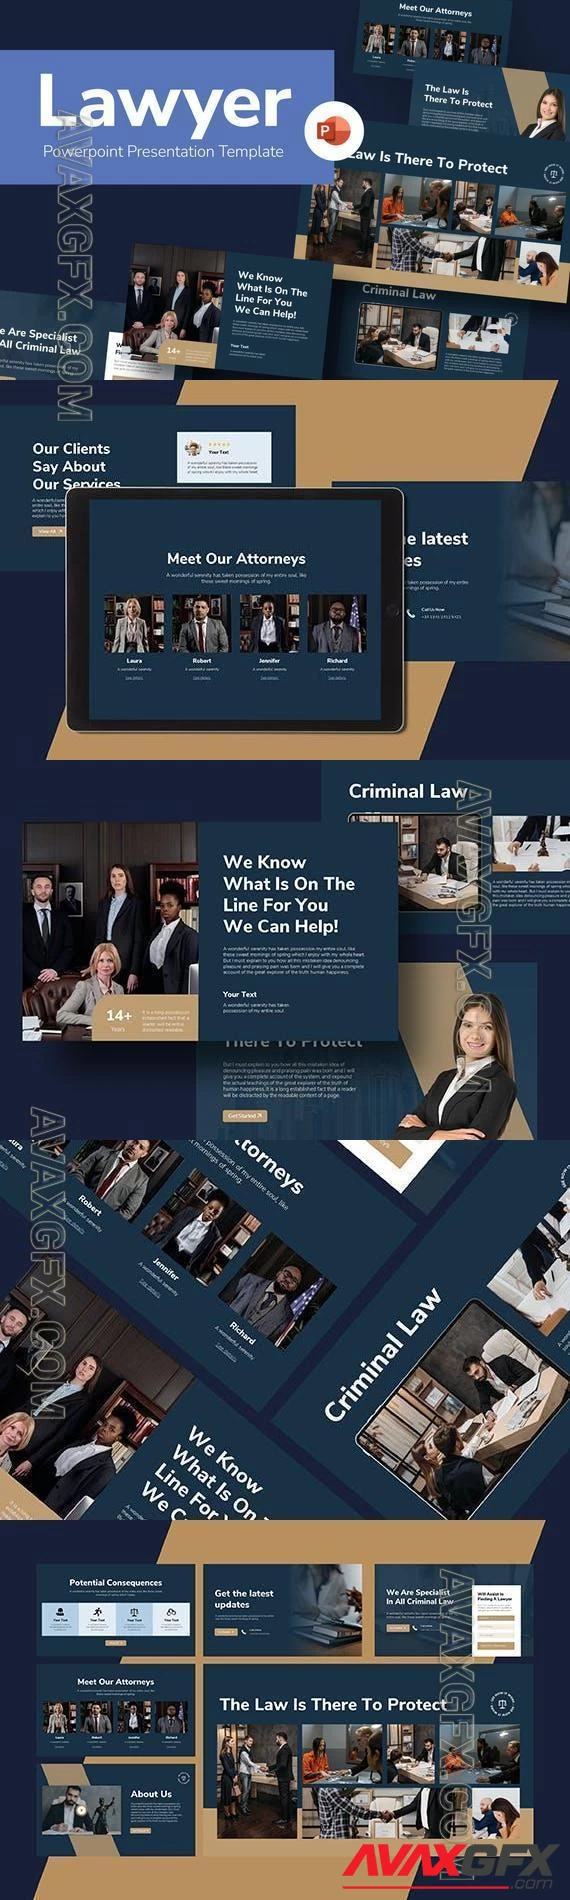 Lawyer Powerpoint Template